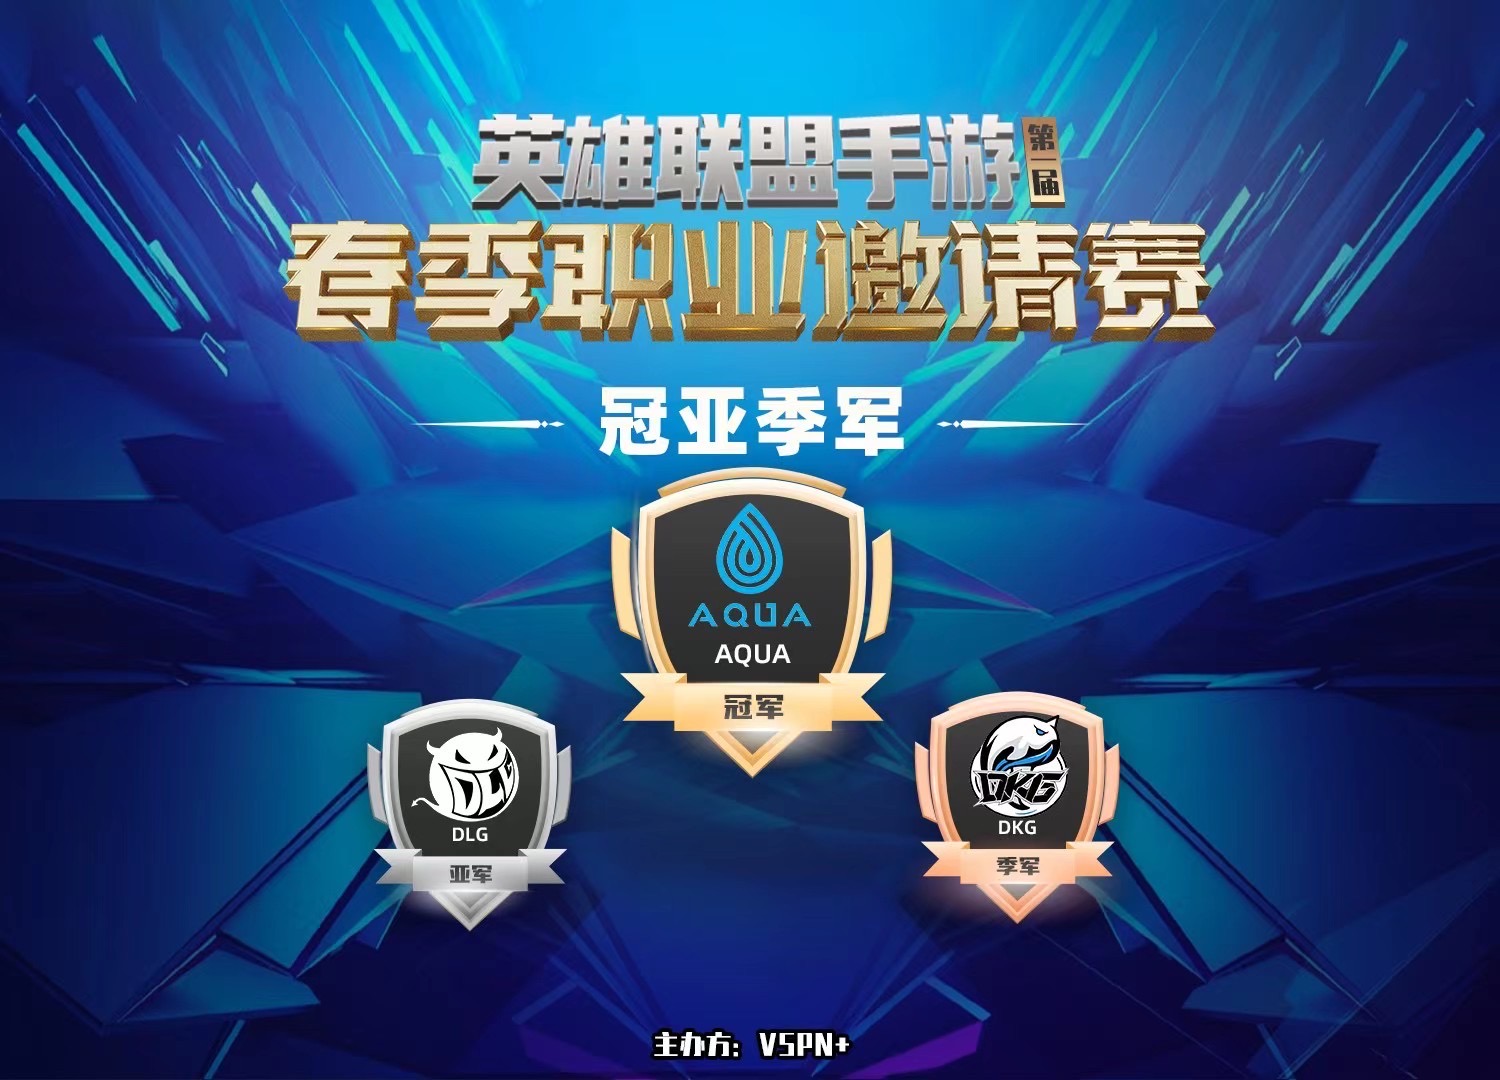 DWG champion skin gives heat, li Ge is envied, LOLM spring surpasses champion to also be worth to have